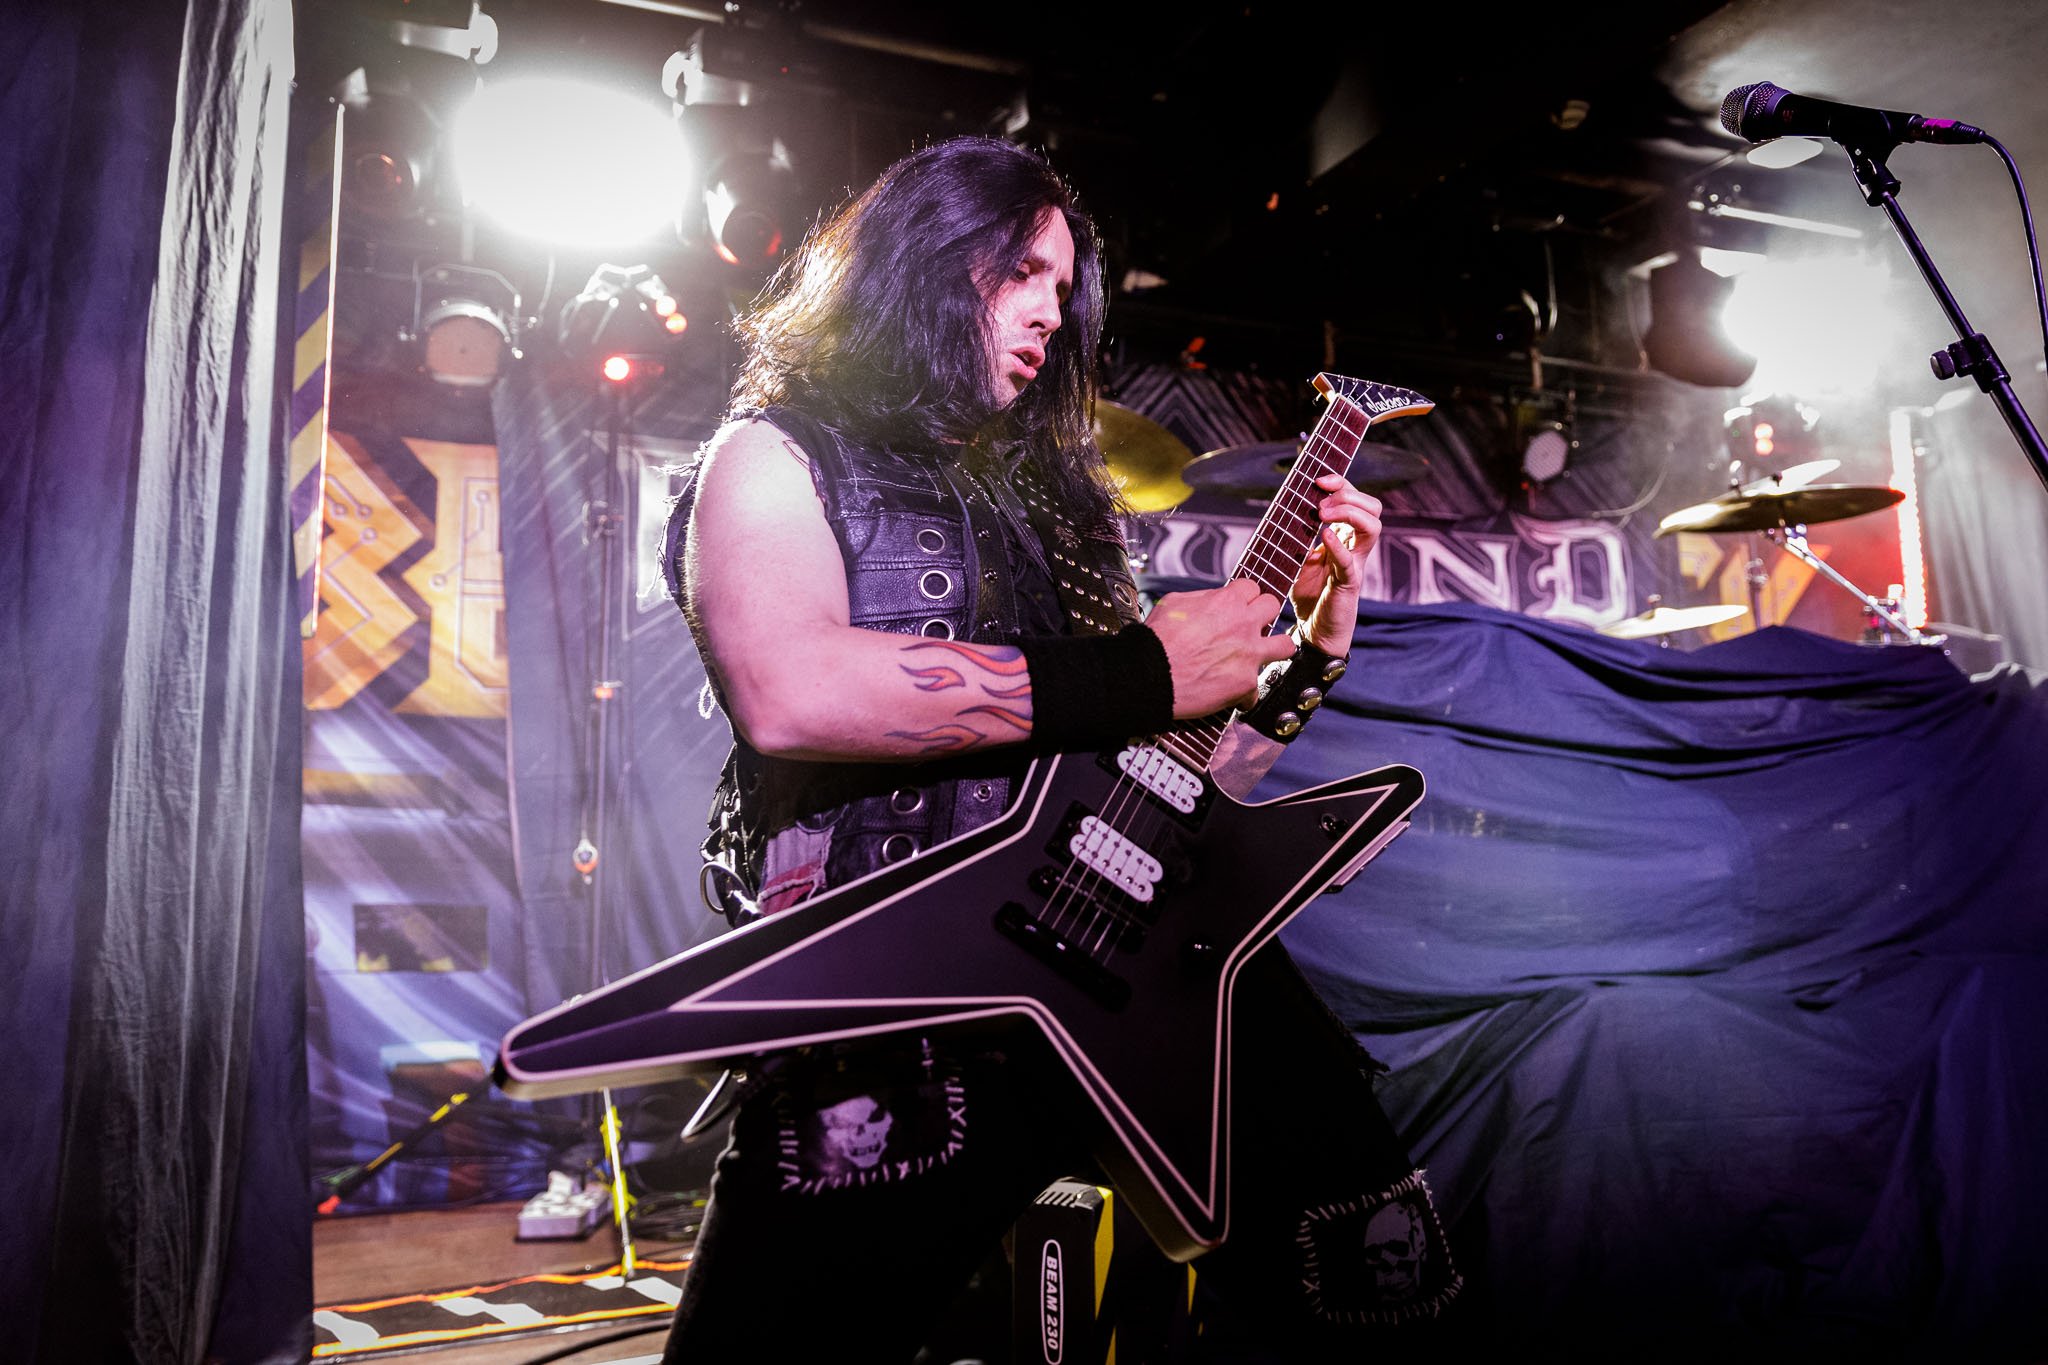 Firewind at the Academy Club in Manchester on February 23rd 2023